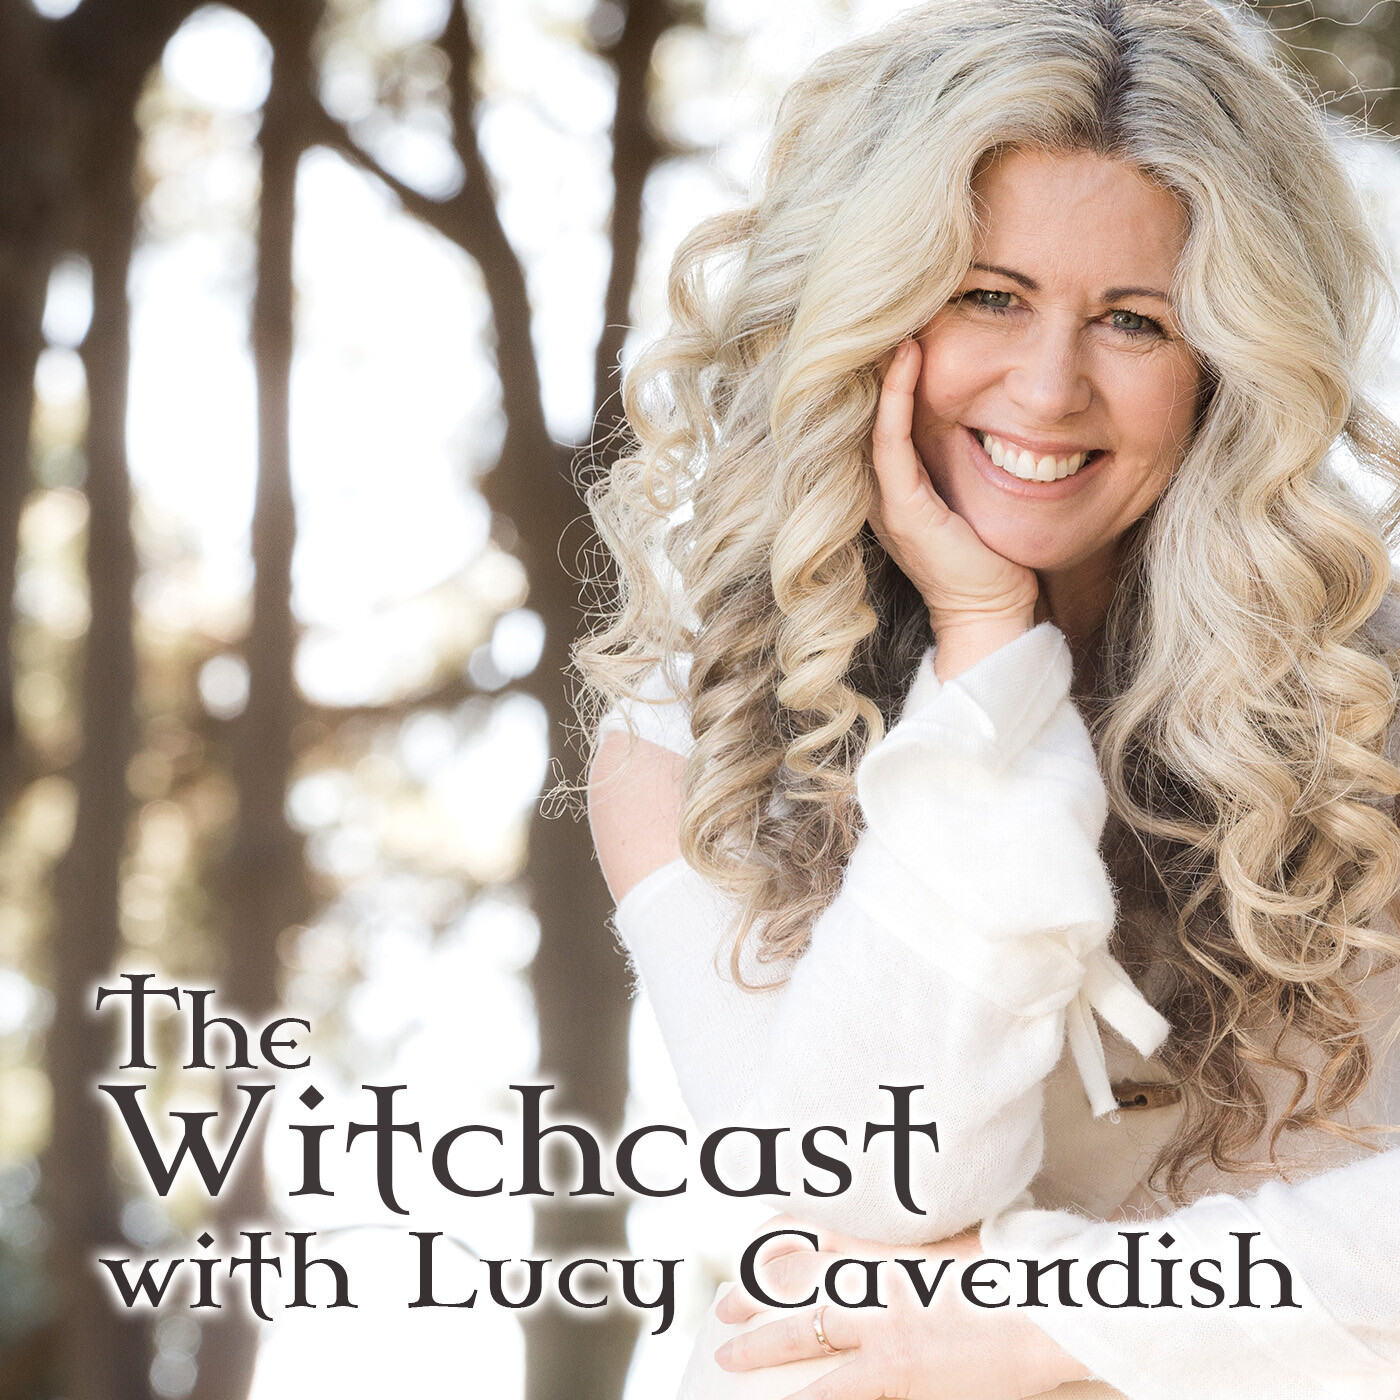 The Witchcast - a Northern Hemisphere Celebration of Lughnasad